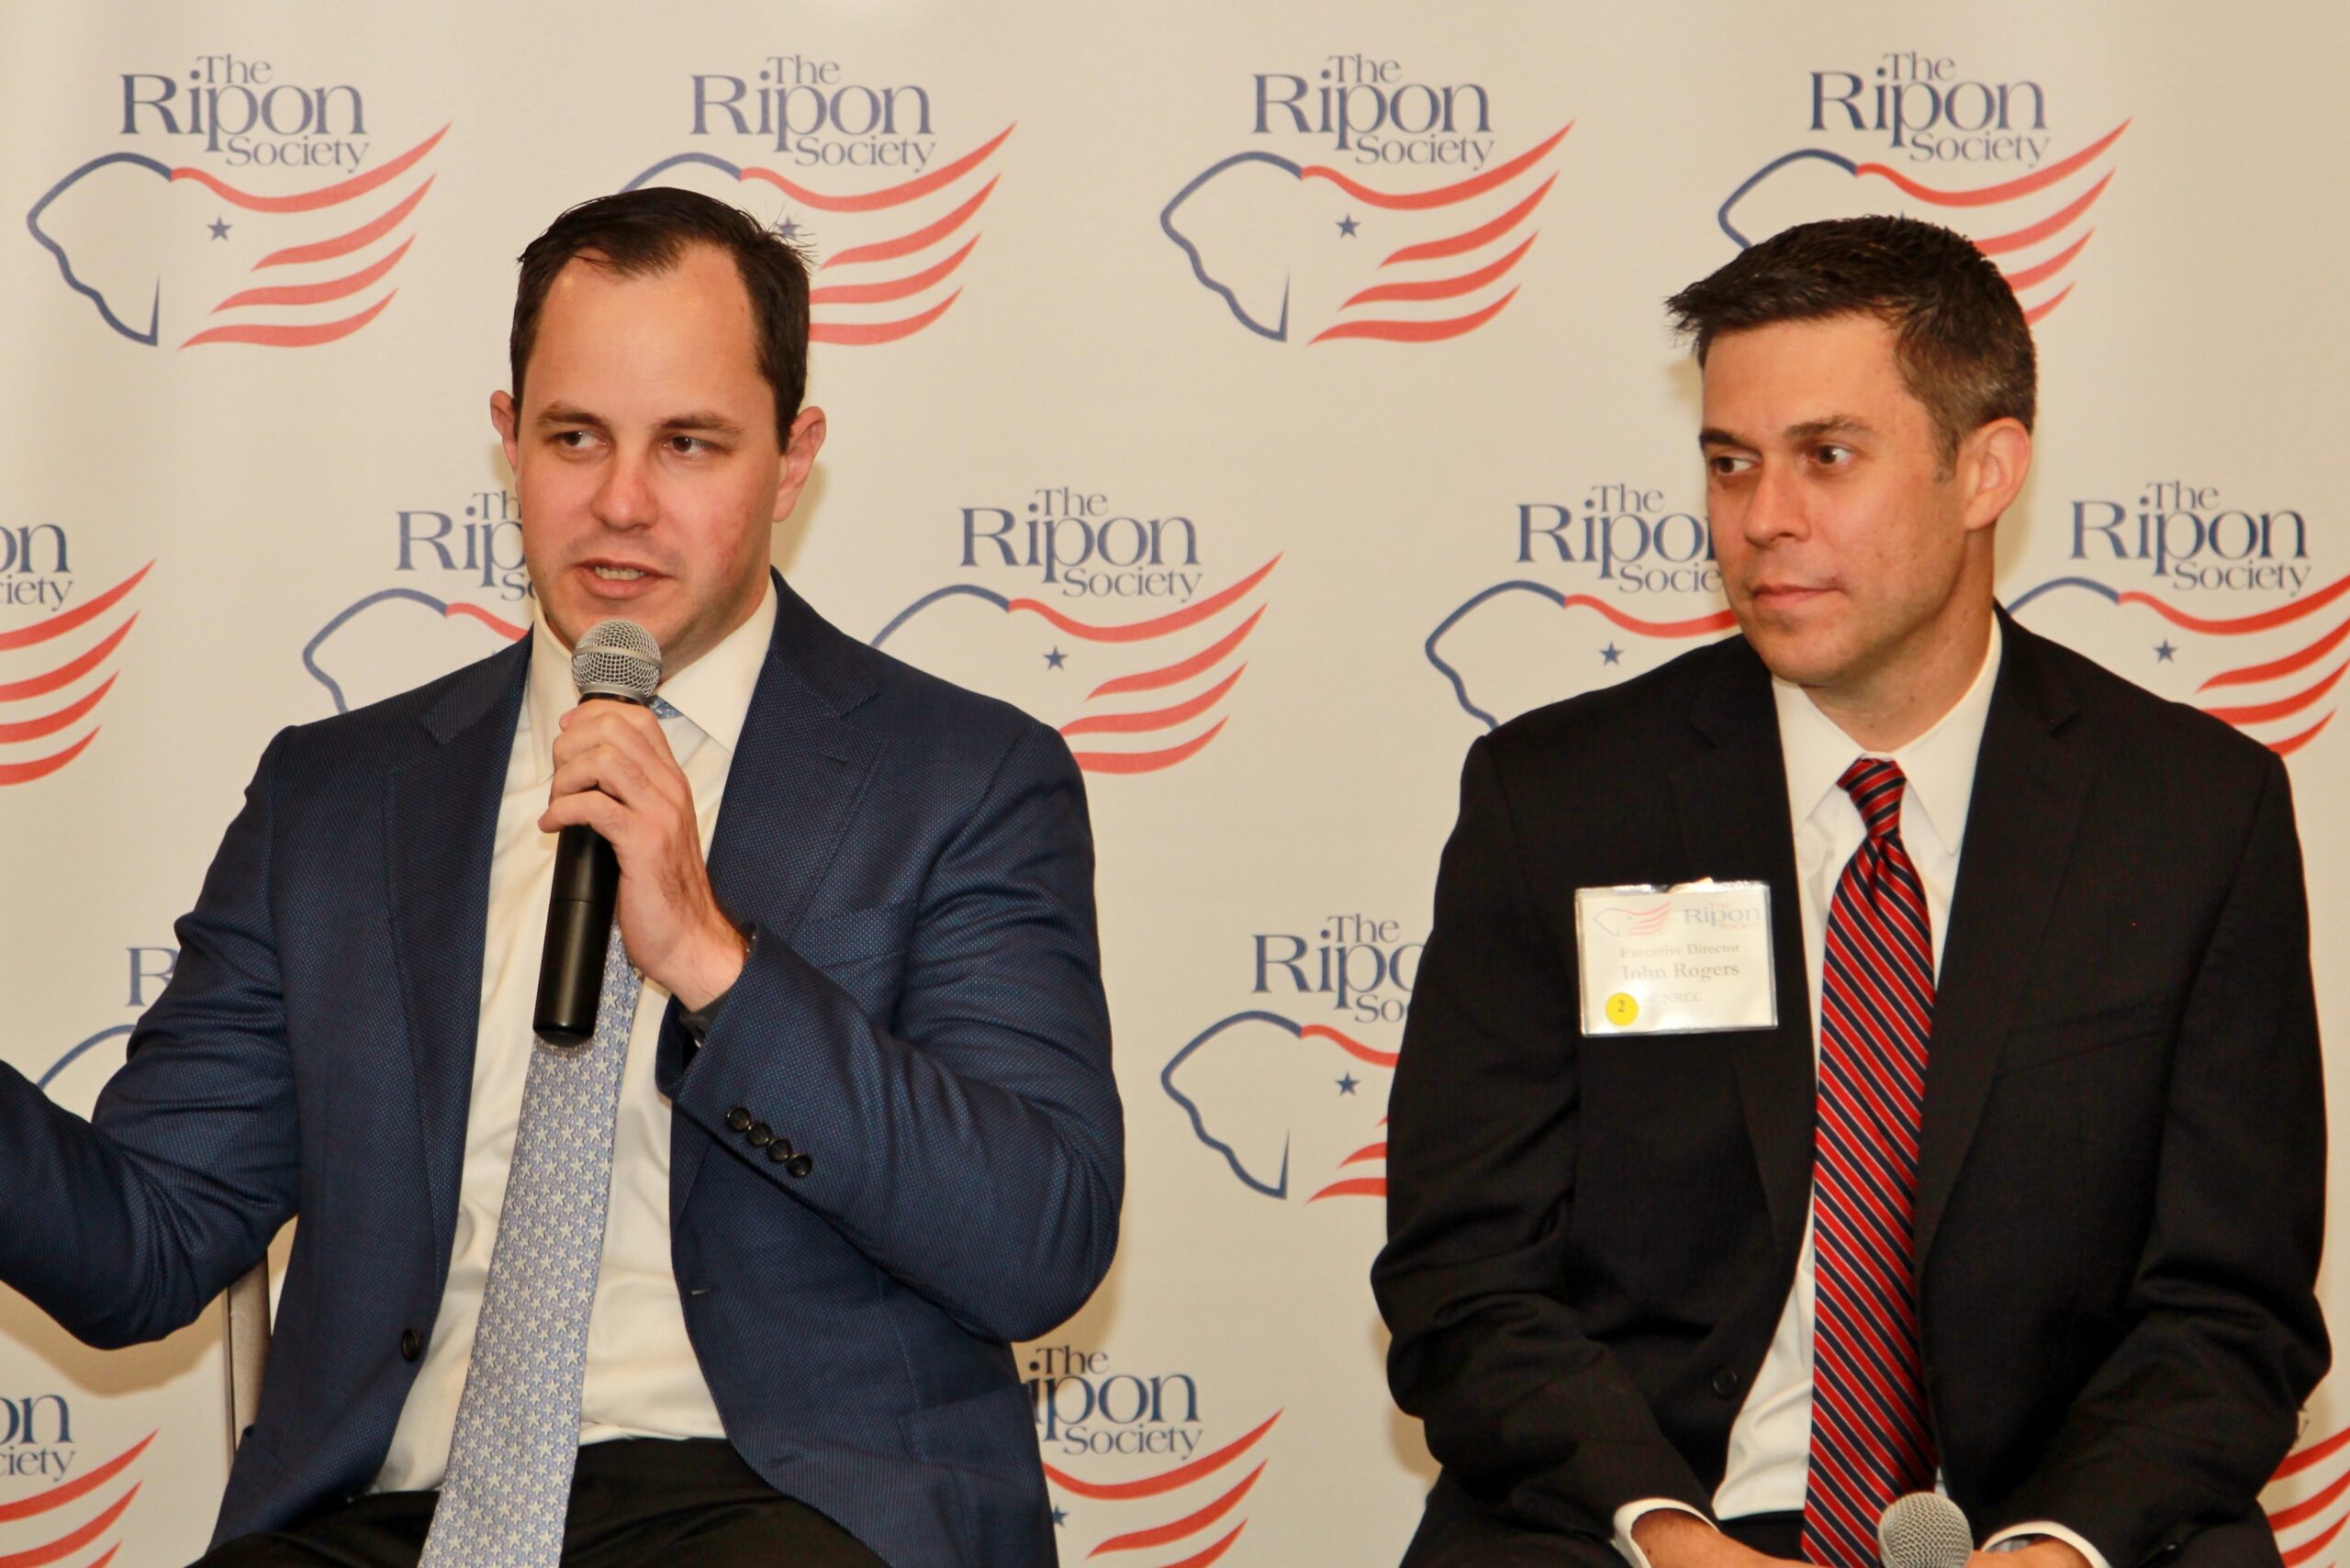 Ripon Society Holds Mid-Term Preview with Executive Directors of the NRSC & NRCC